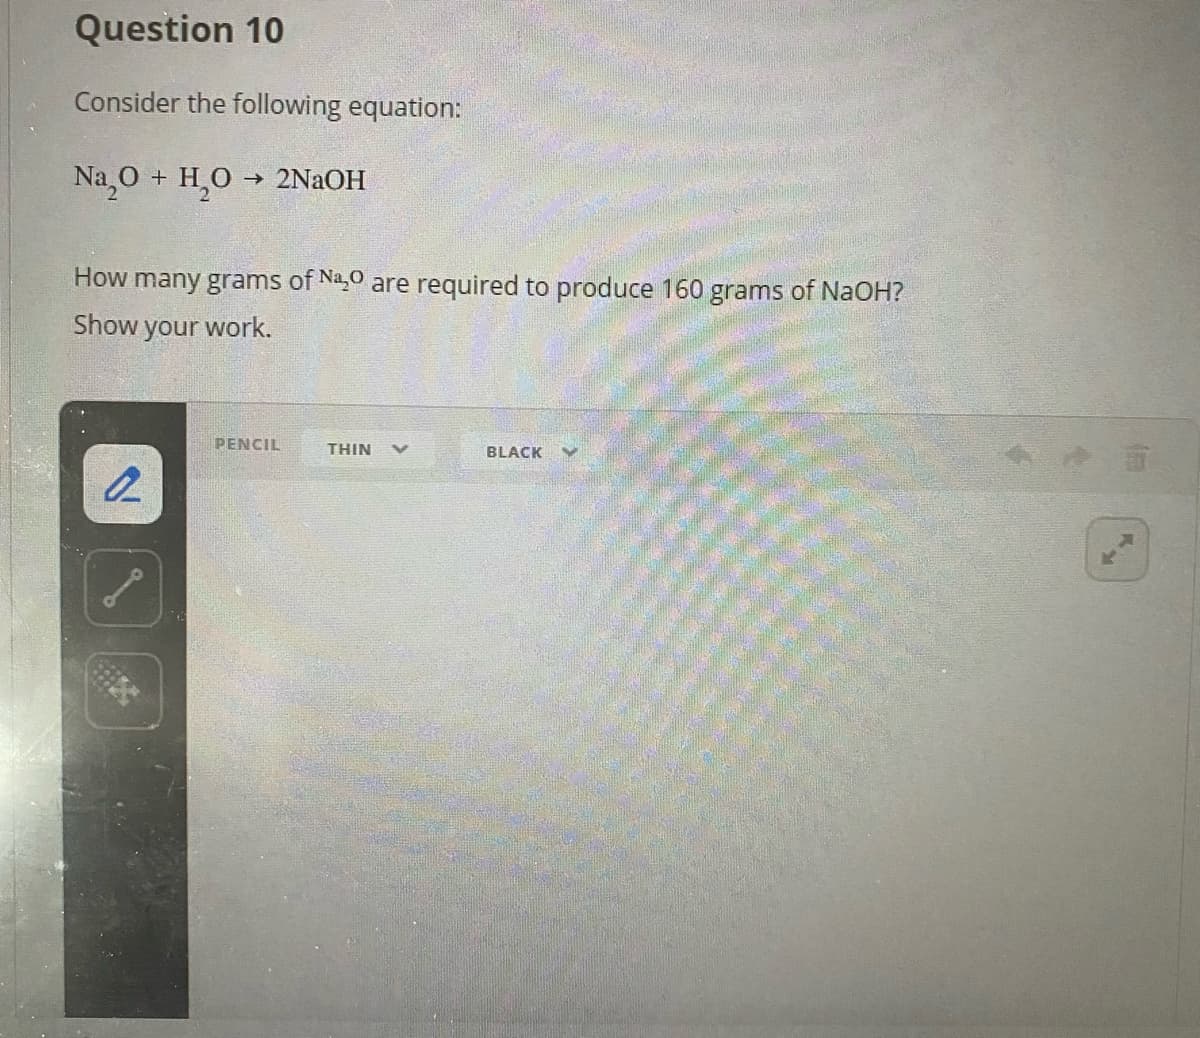 Question 10
Consider the following equation:
Na 0 + H,0 → 2NAOH
How many grams of Na,0 are required to produce 160 grams of NaOH?
Show
your work.
PENCIL
THIN
BLACK
